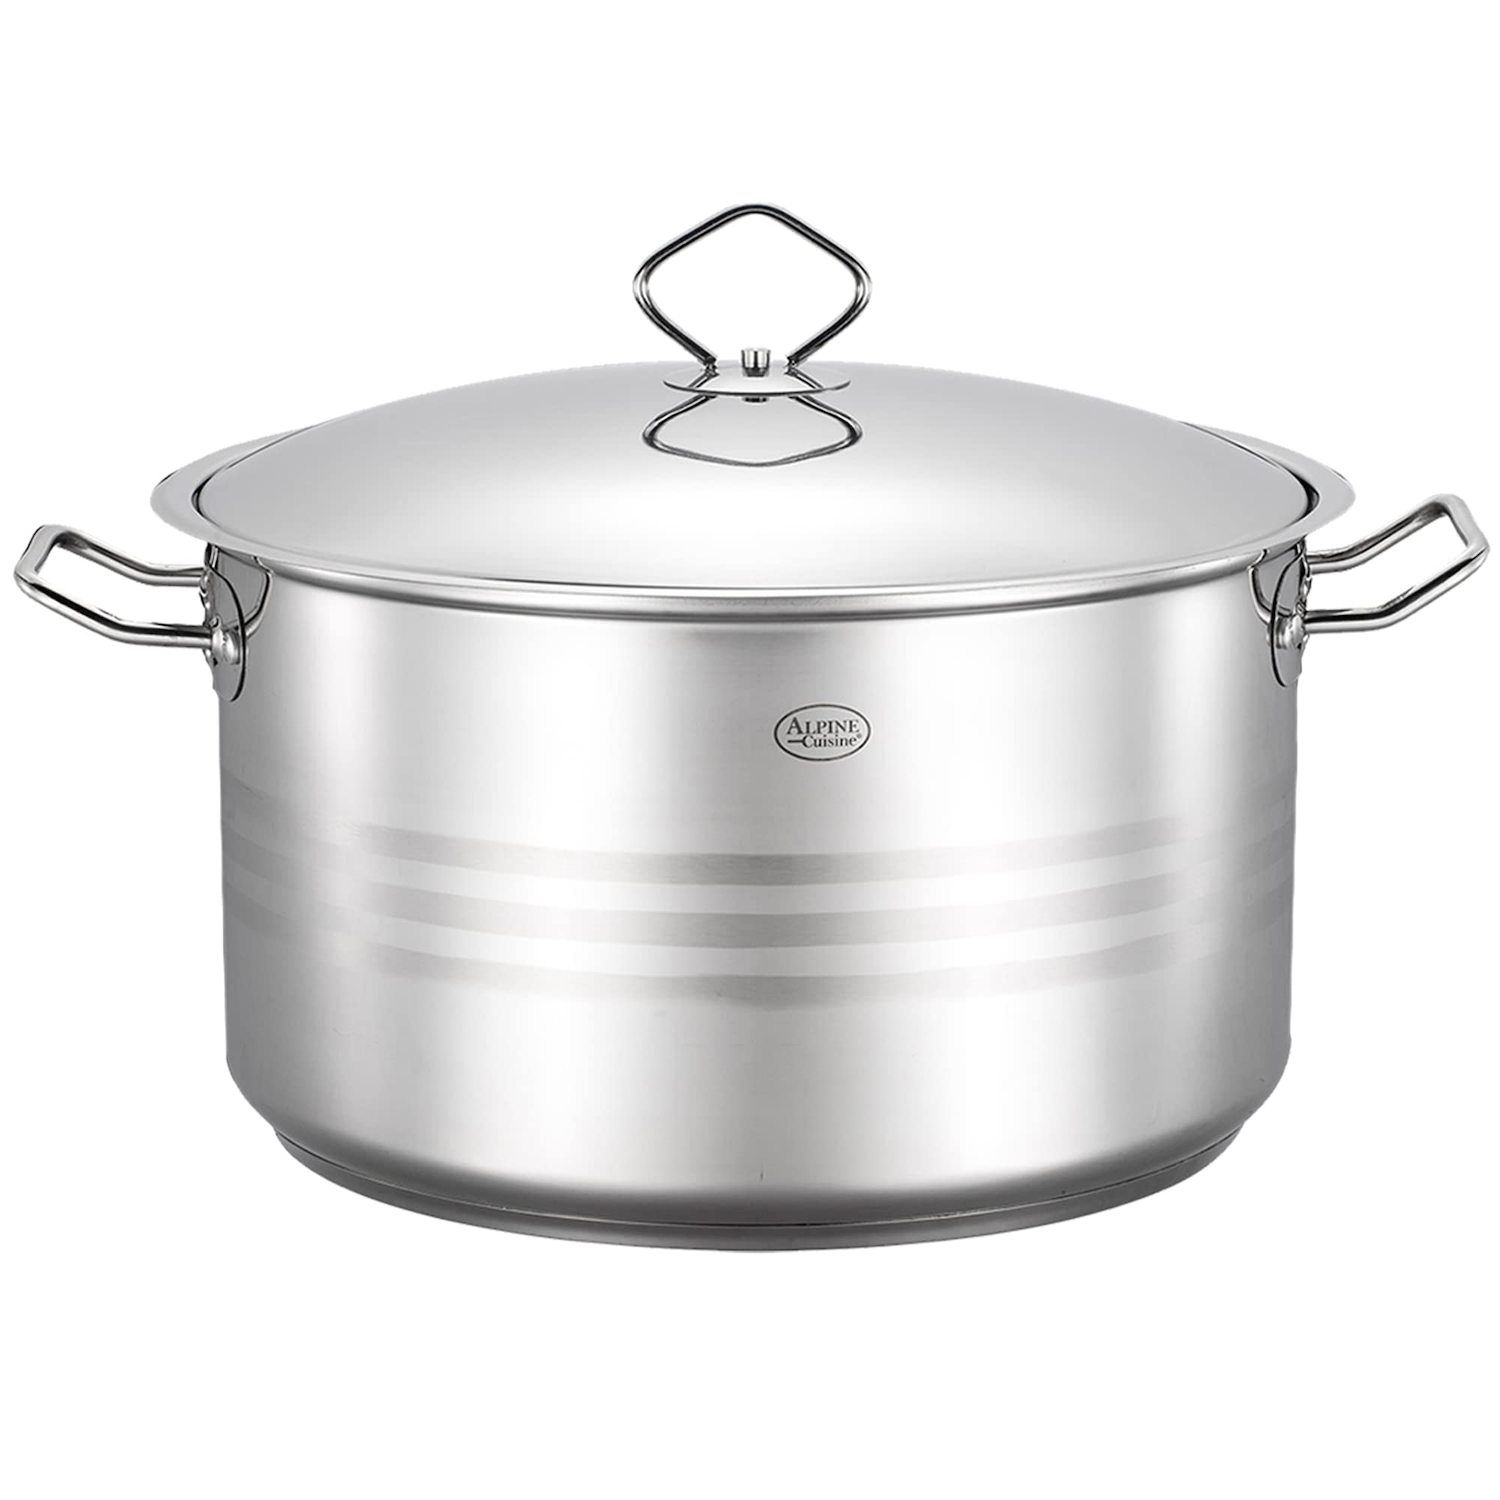 Oster Sangerfield 5 Piece 4 Quart Stainless Steel Dutch Oven with Lid and 3-Section Dividers